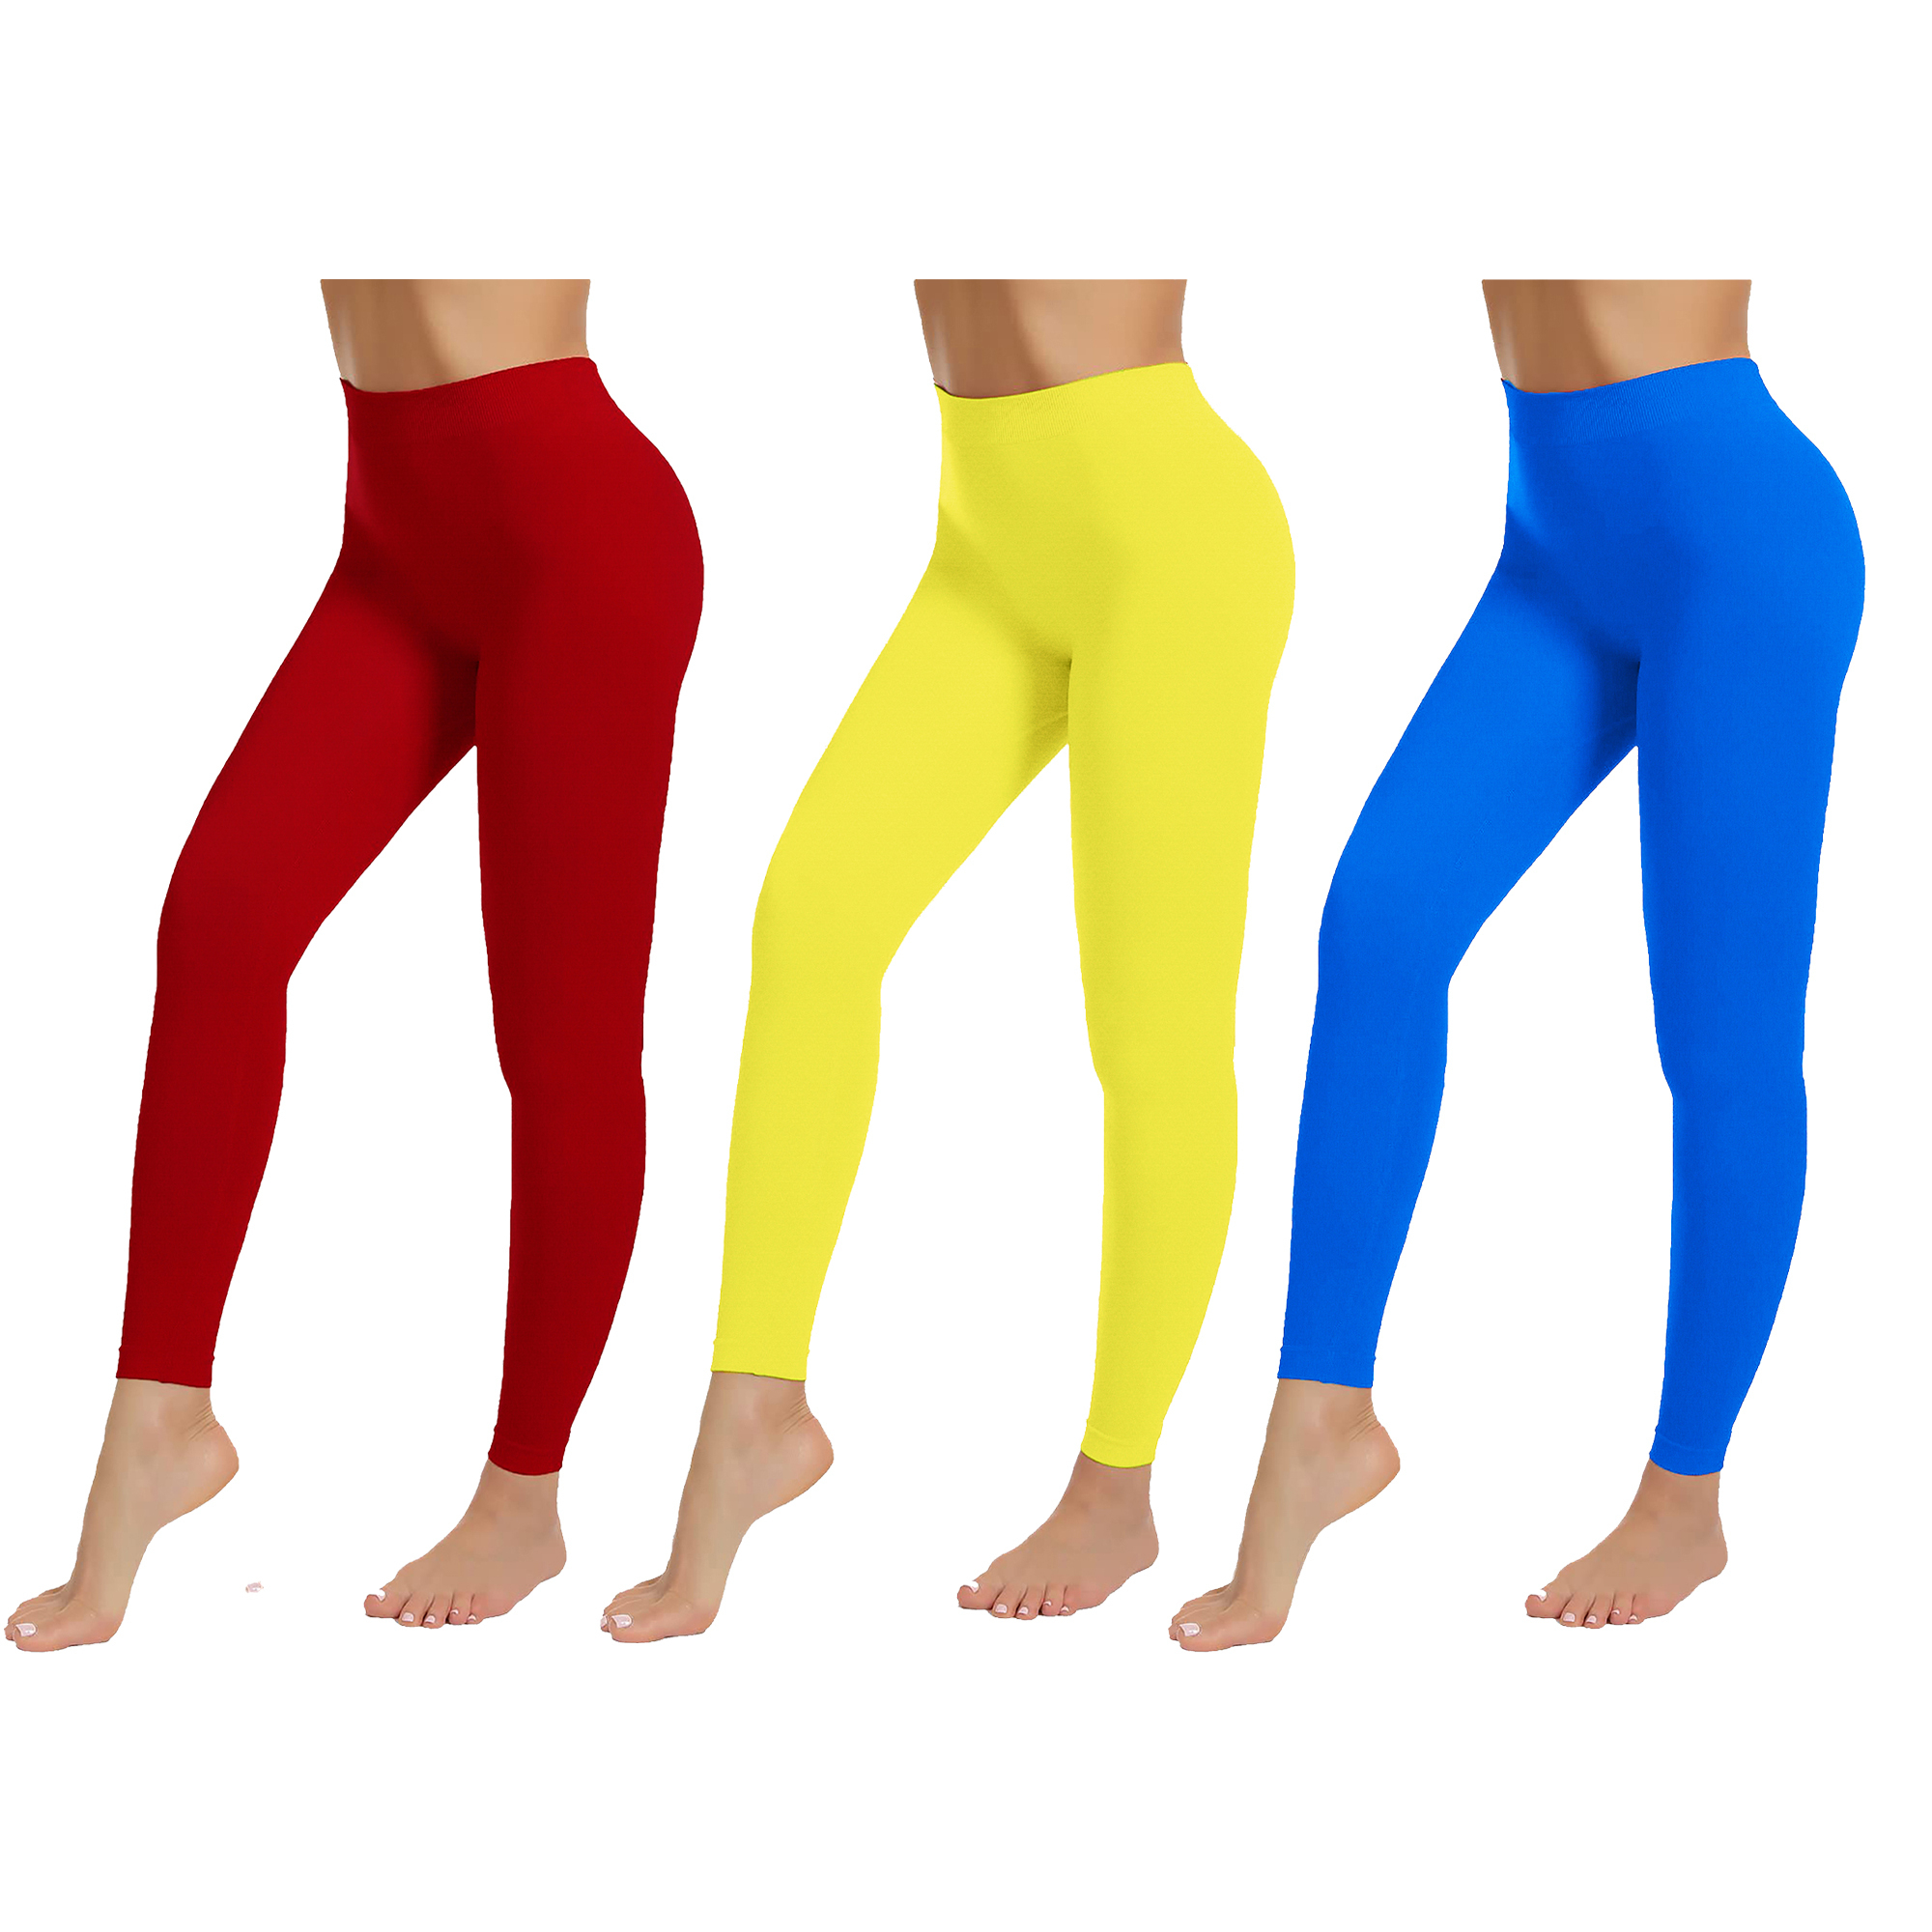 3-Pack: Women's High-Waist Ultra-Soft Stretchy Solid Fitness Yoga Leggings Pants - BLUE, S